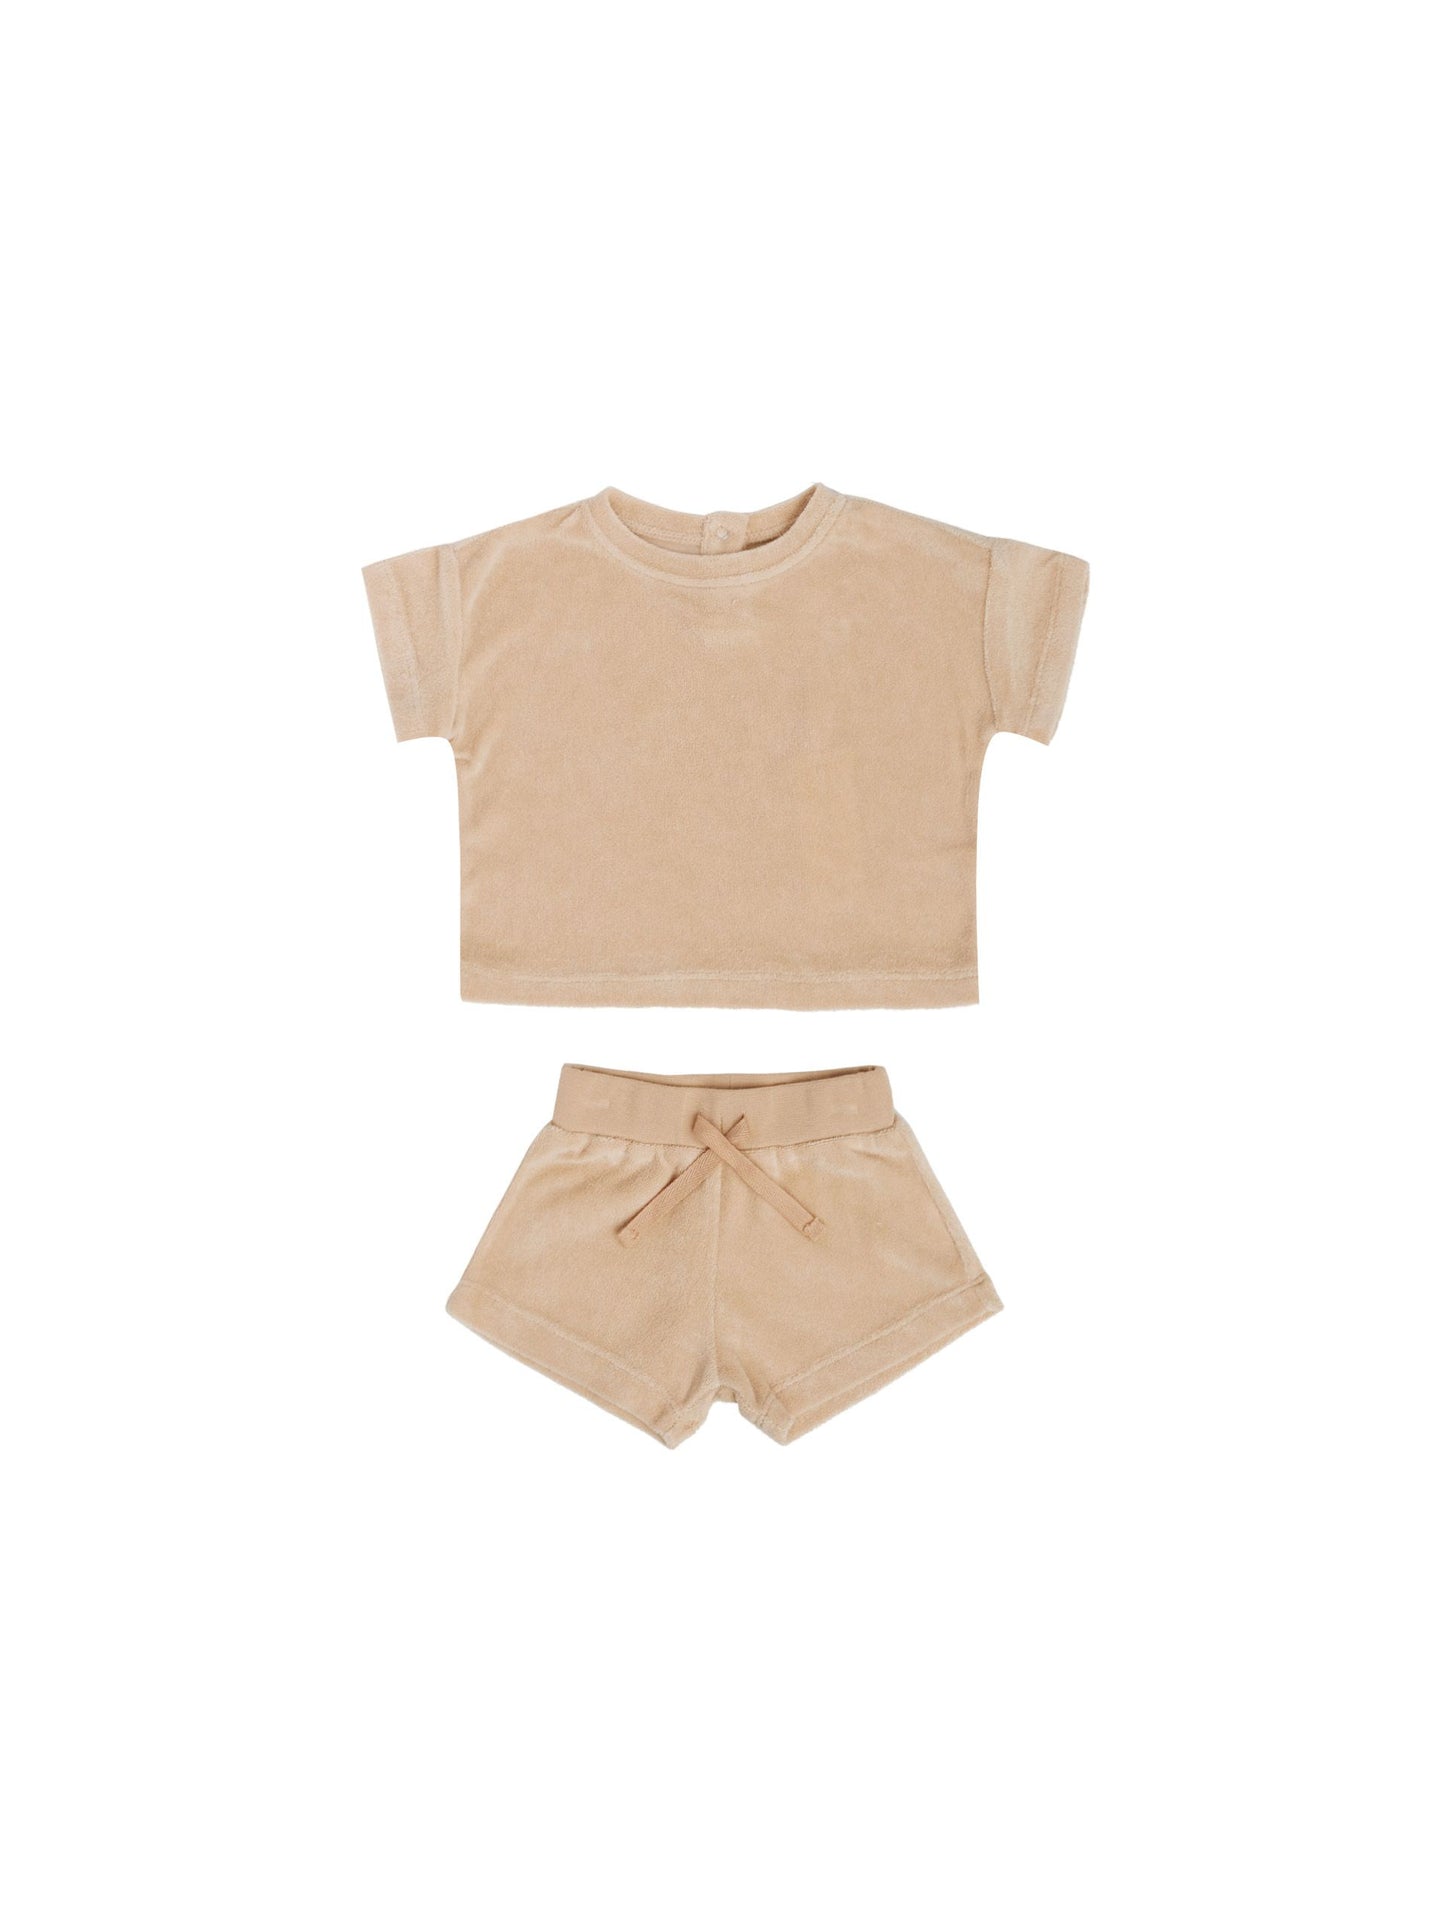 Quincy Mae One-Pieces & Short Sets Spring 23